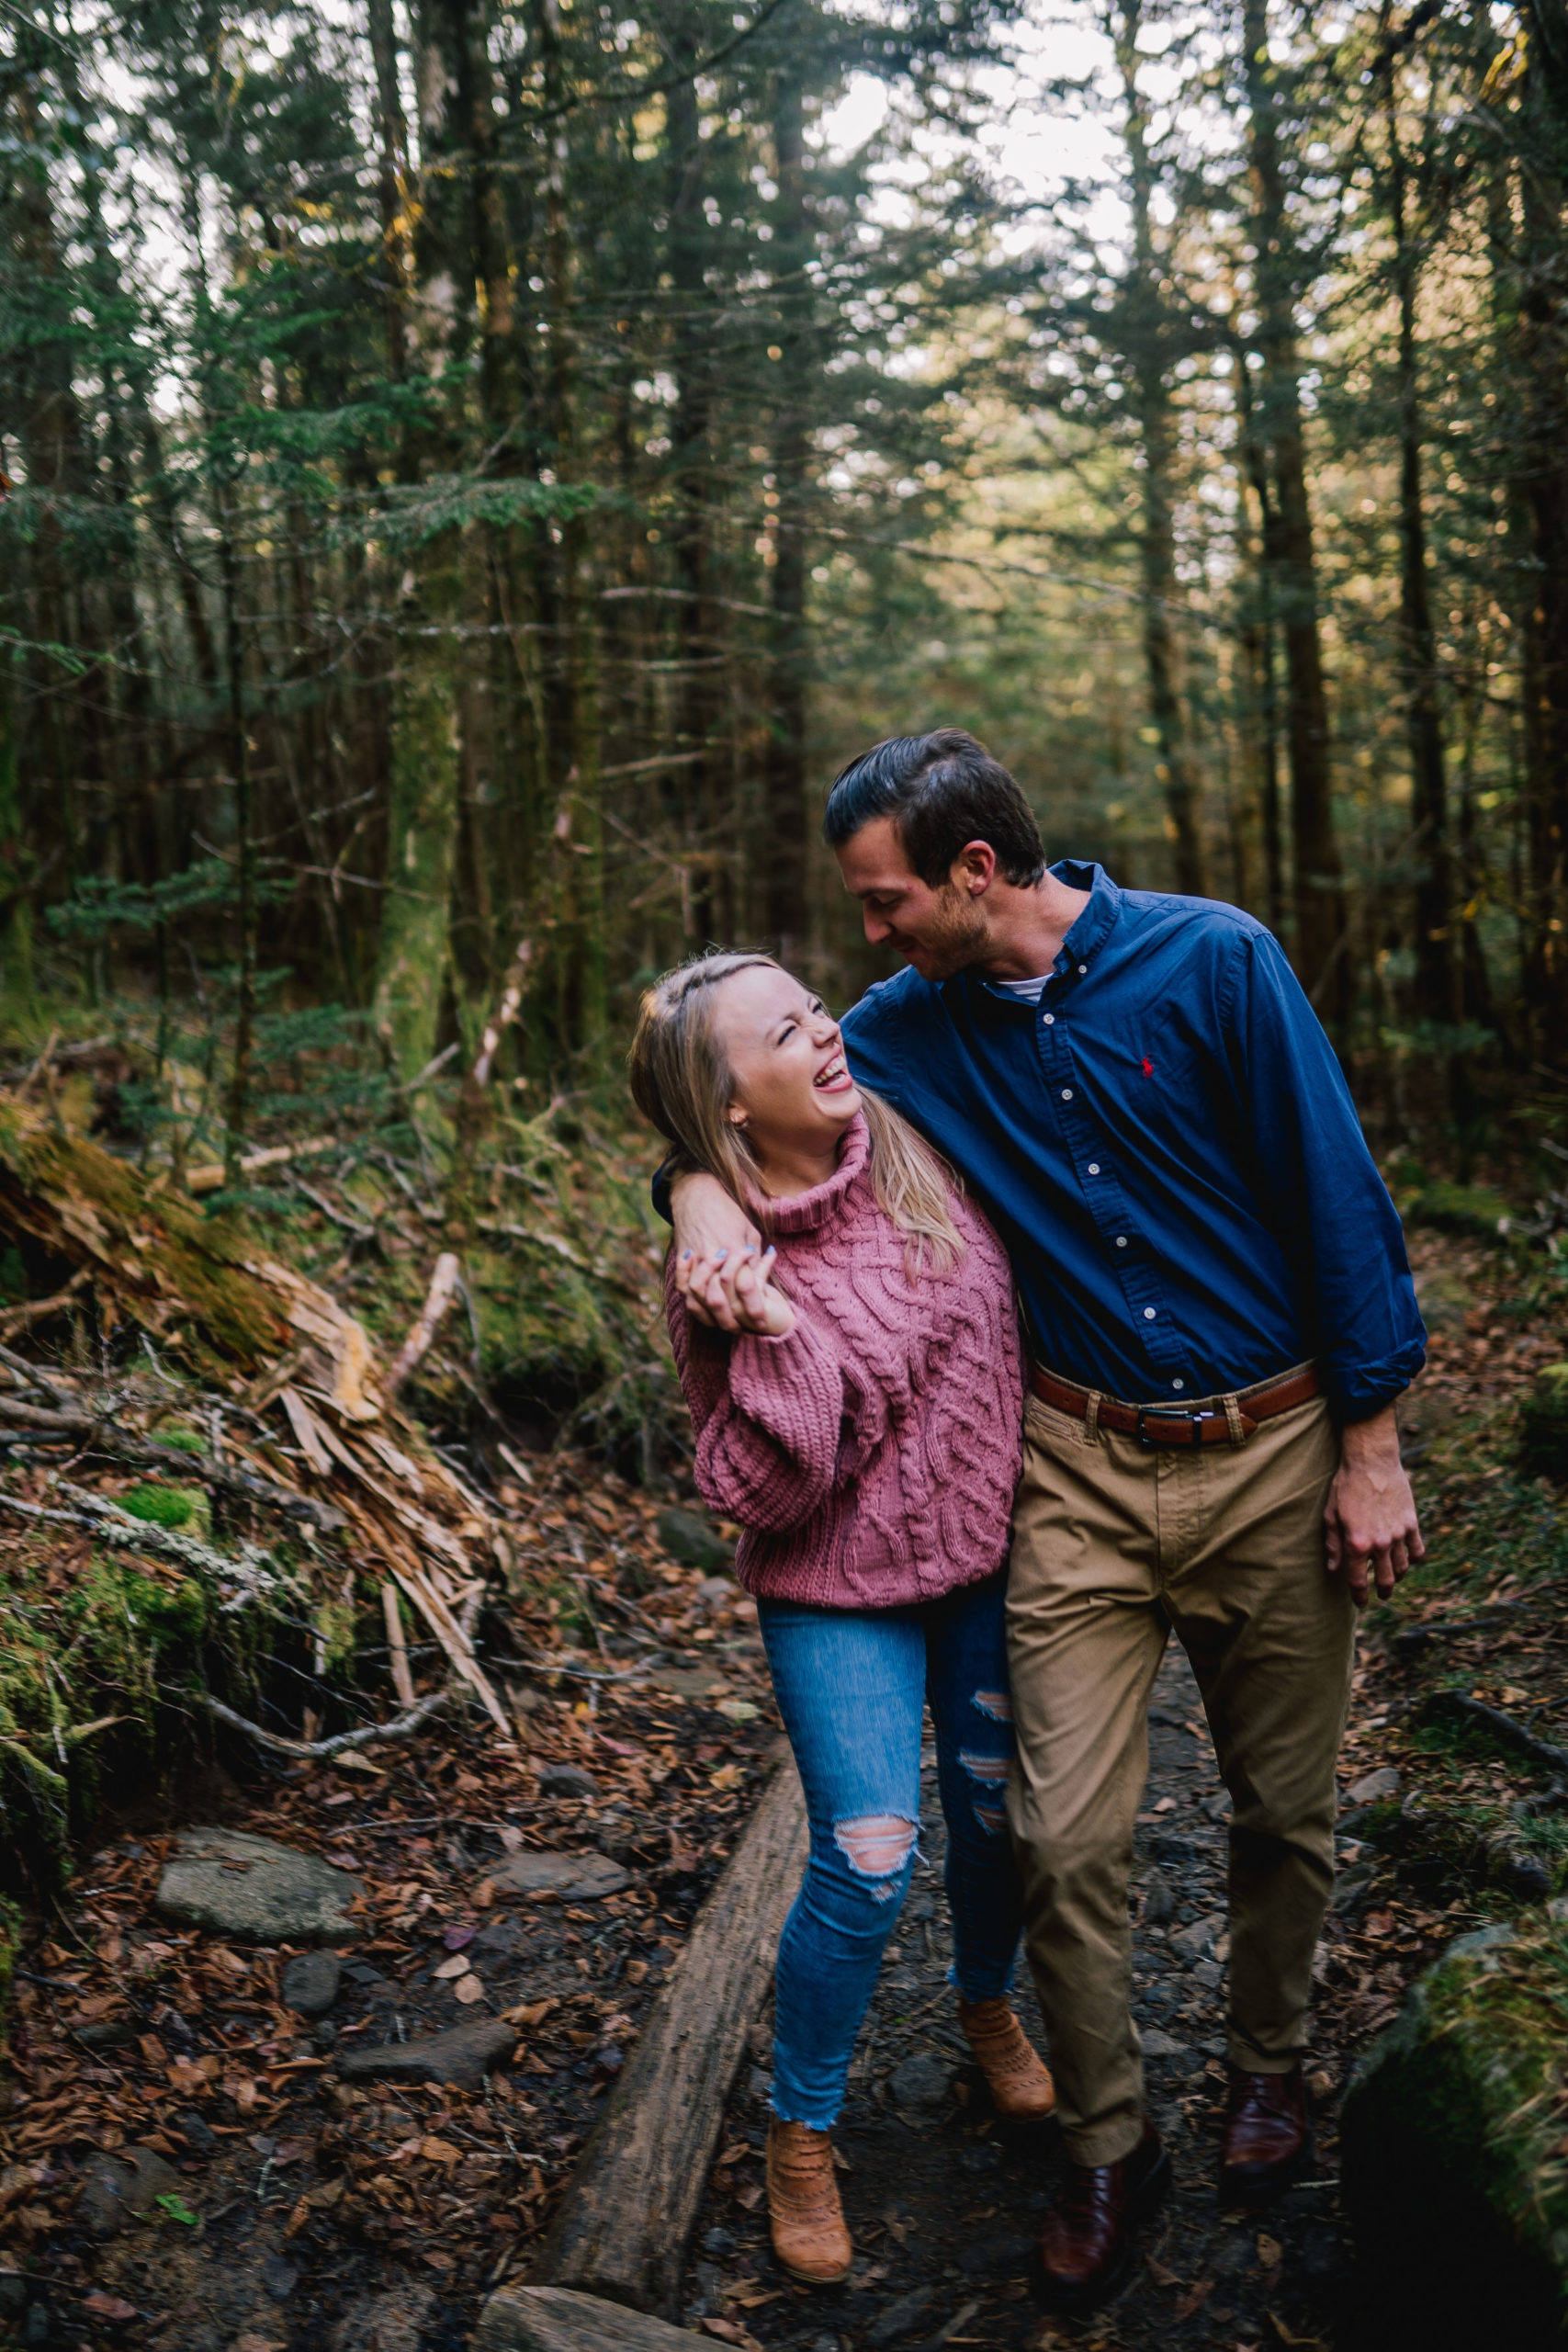 Sacramento wedding photographer captures couple laughing as they walk down a dirt trail while the man holds the woman around the shoulder, casual winter engagement photo outfits